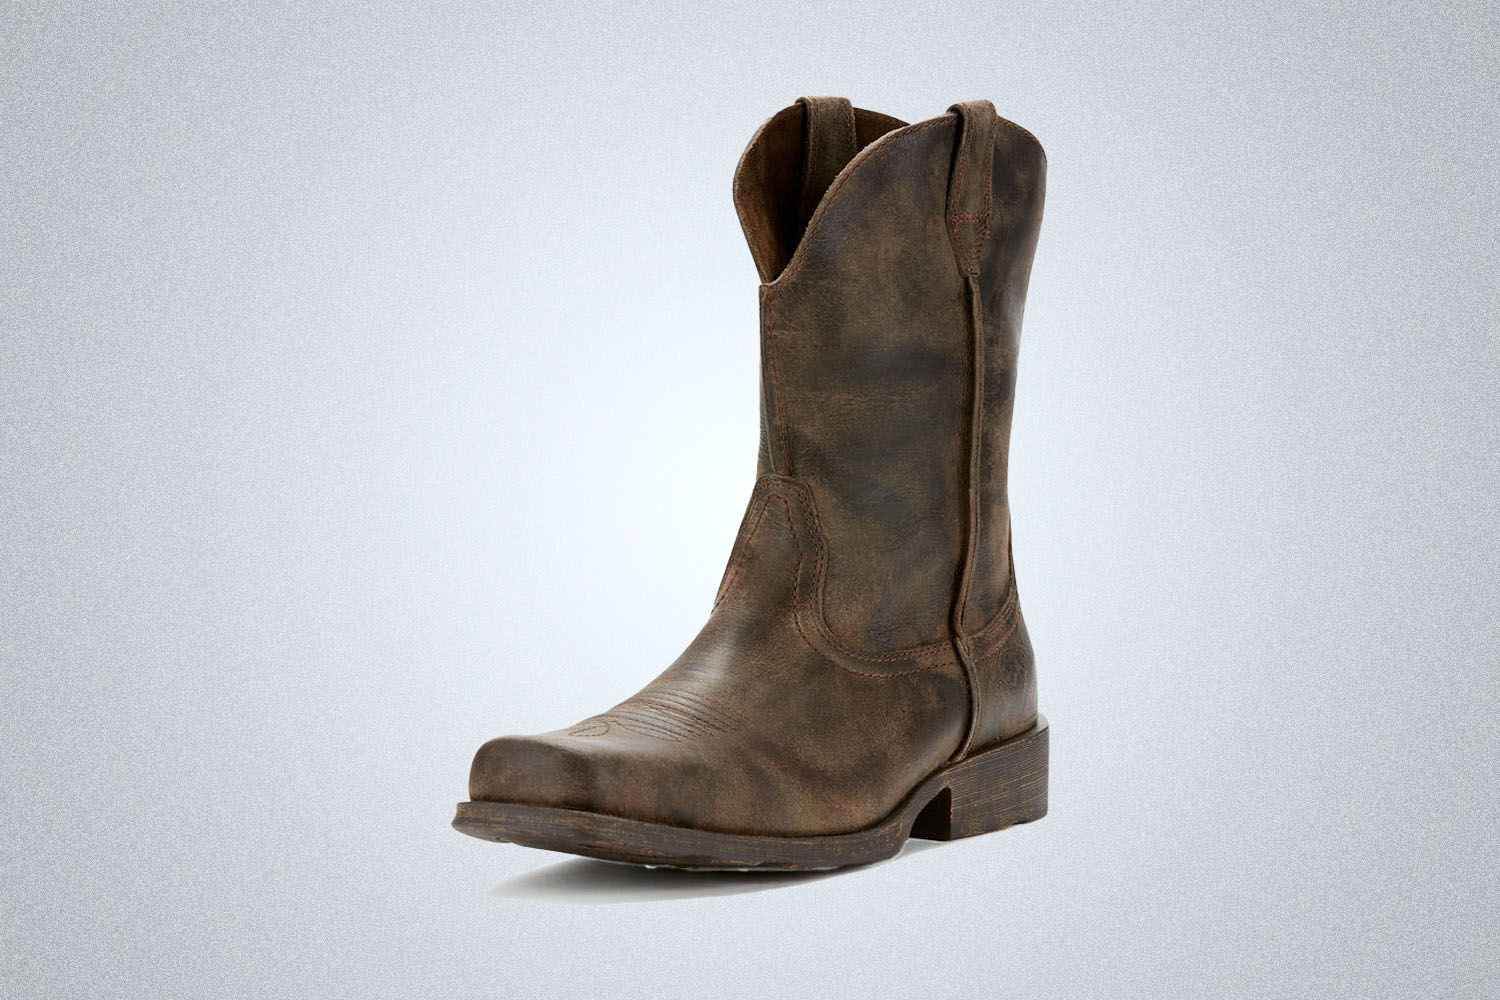 a pair of brown western boots from Ariat on a grey background 